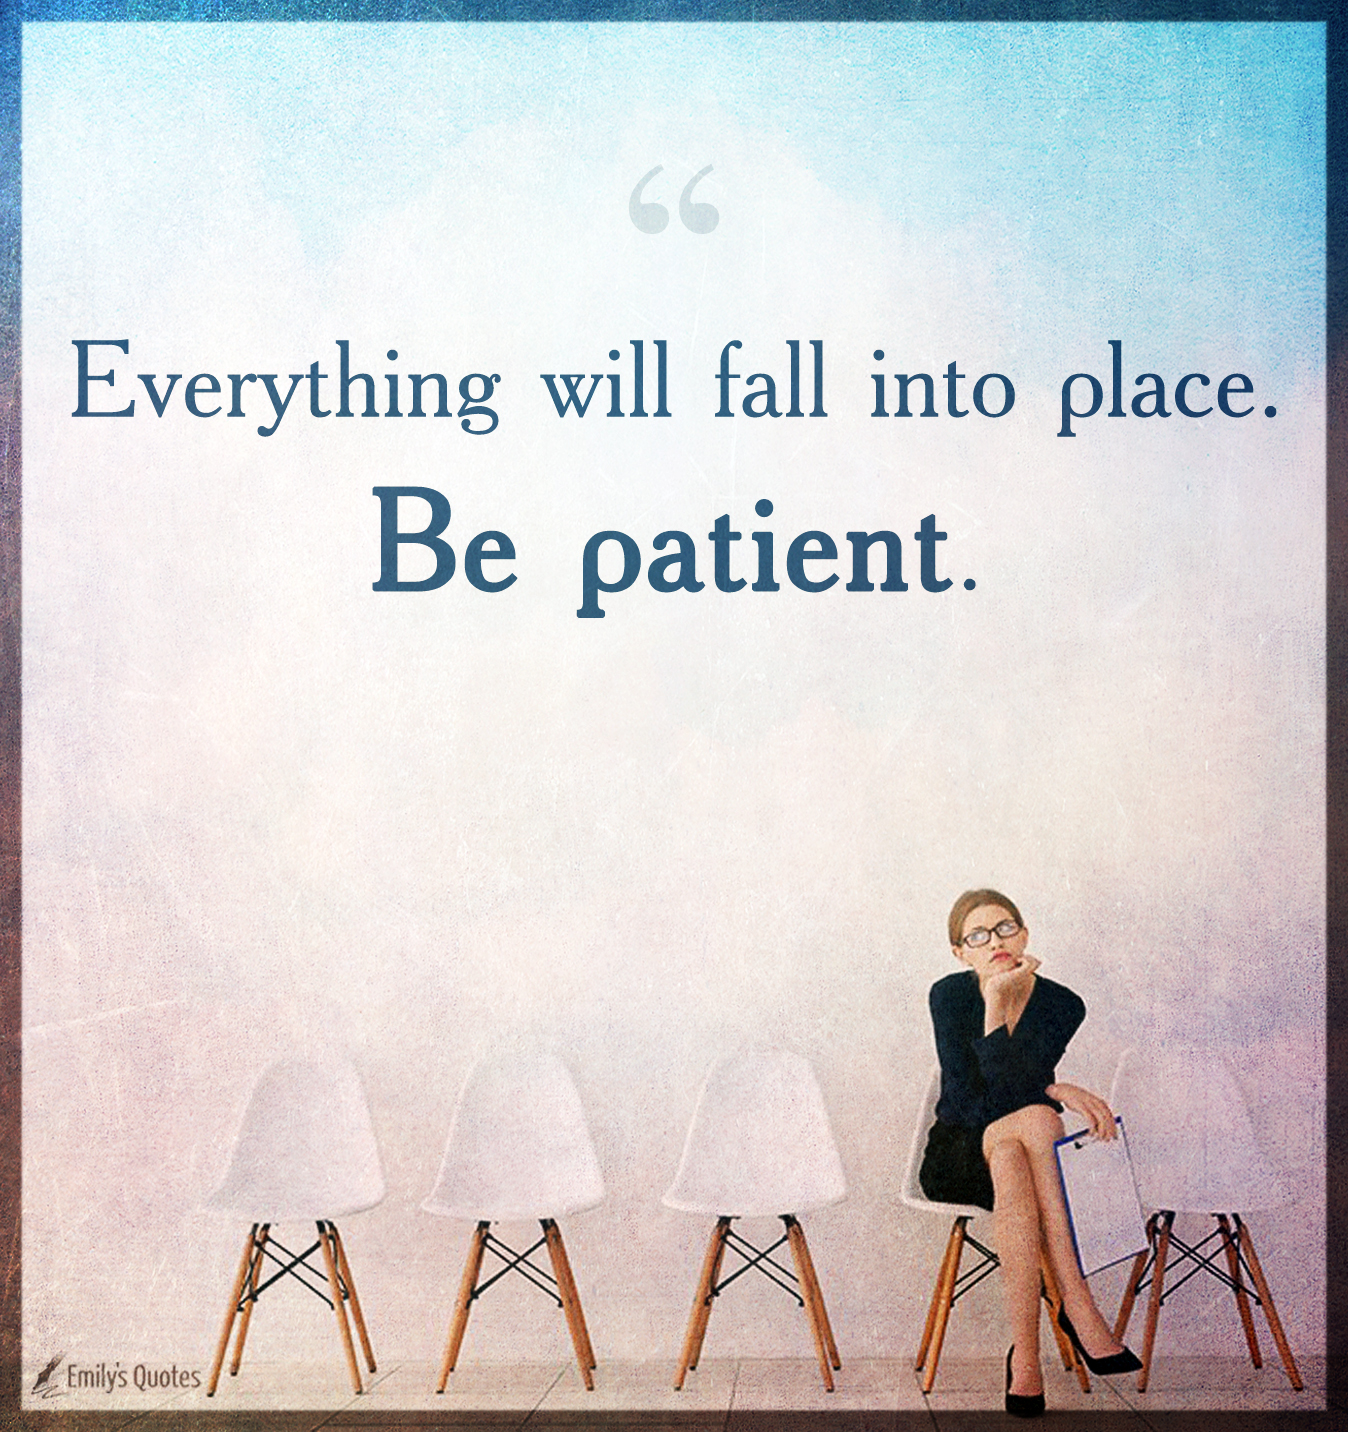 Everything will fall into place. Be patient